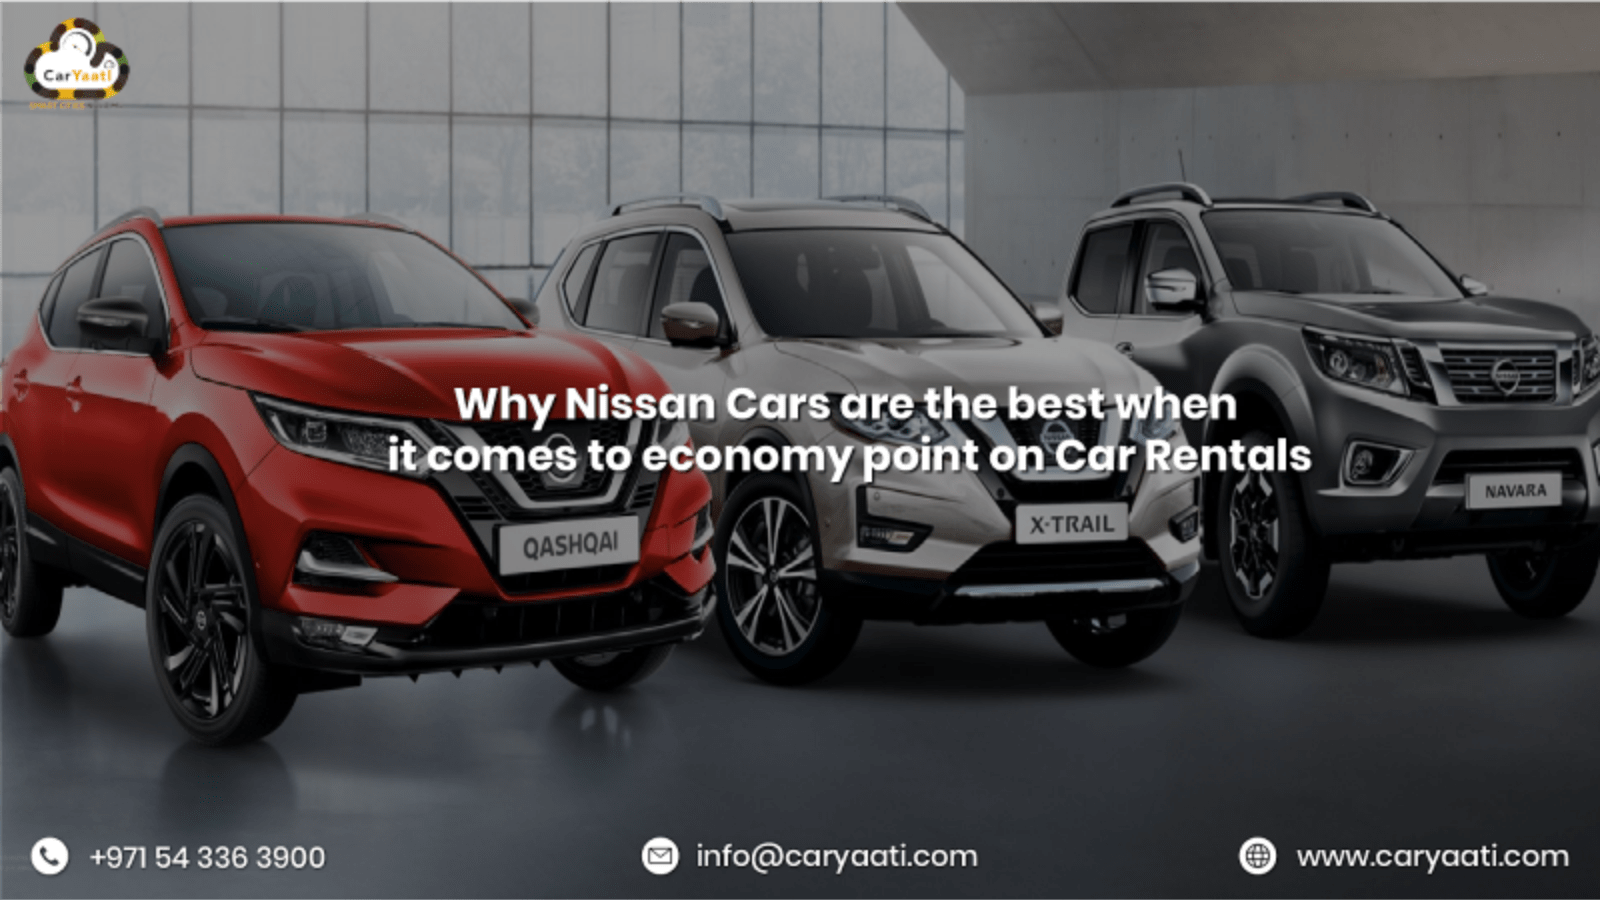 Why Nissan Cars are the Best When It Comes to Economy Point on Car Rentals